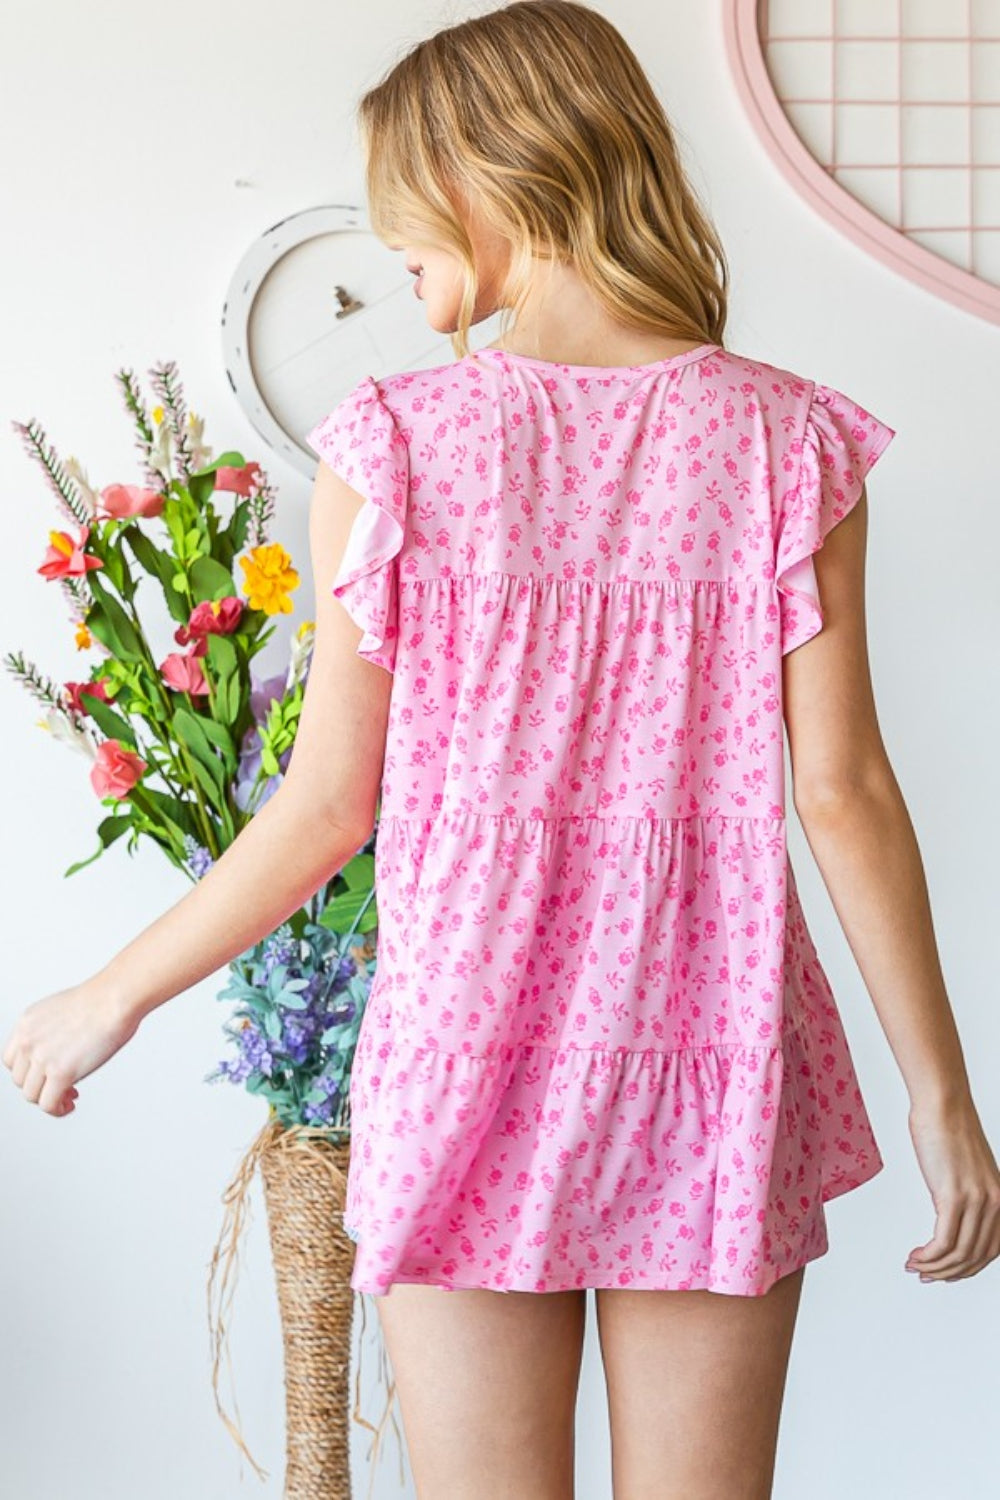 Heimish Full Size Floral Ruffled Tiered Top - Tigbul's Variety Fashion Shop